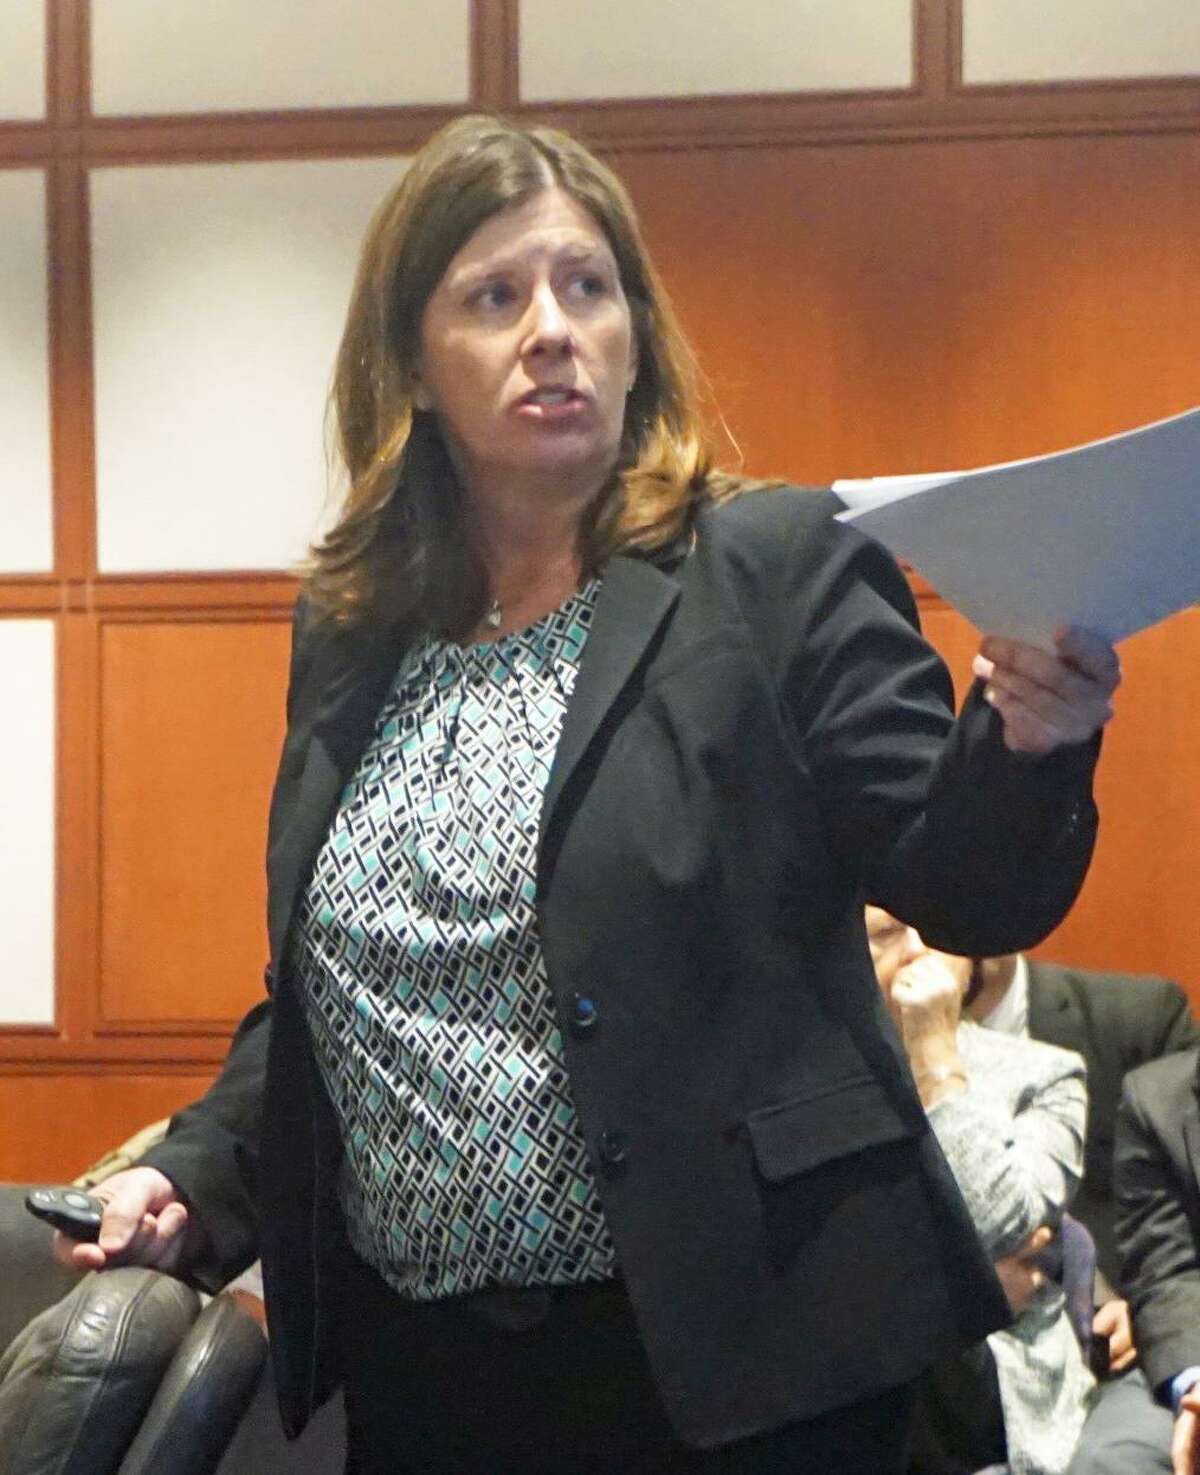 Chelsea Turner, interim president and CEO of the Connecticut Lottery Corporation, presented to the Lottery's Board of Directors at the Capitol in Hartford, Conn. on Thursday, February 22, 2018.